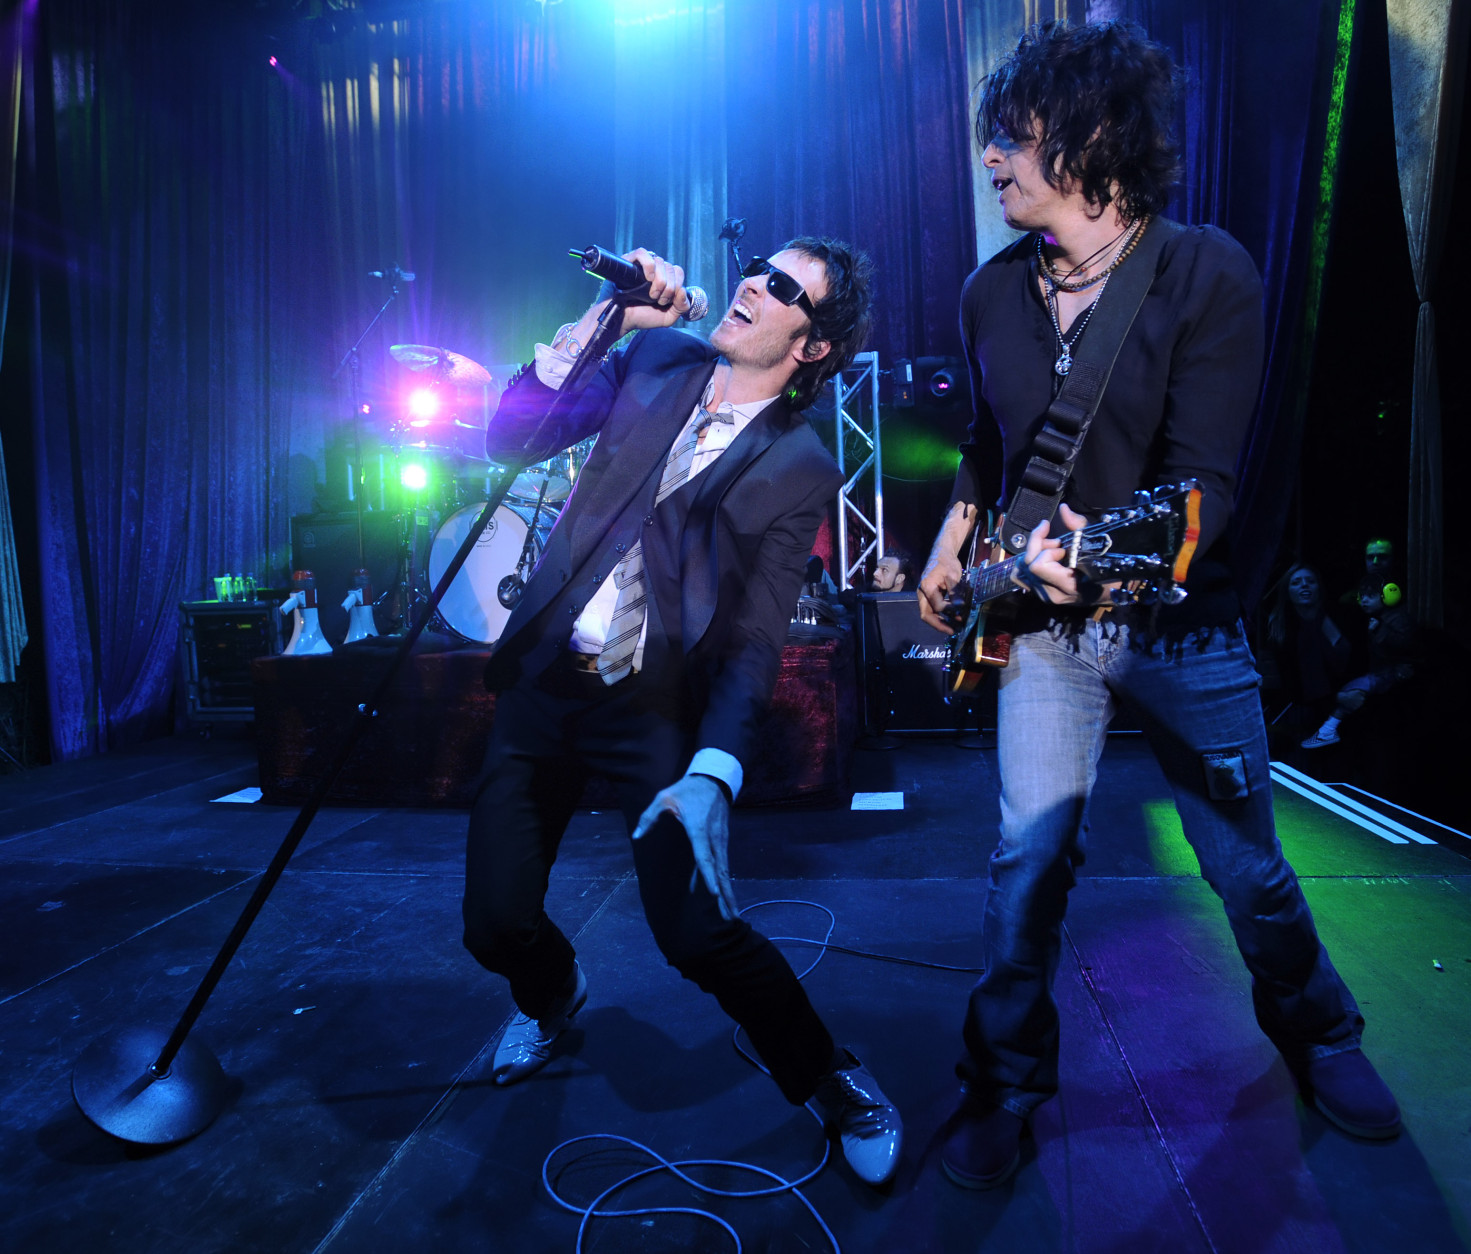 Scott Weiland, left, and Dean DeLeo of Stone Temple Pilots perform at a special private performance in Los Angeles, Monday, April 7, 2008. The band announced that they will be reuniting and will launch their first national tour in almost eight years. (AP Photo/Chris Pizzello)